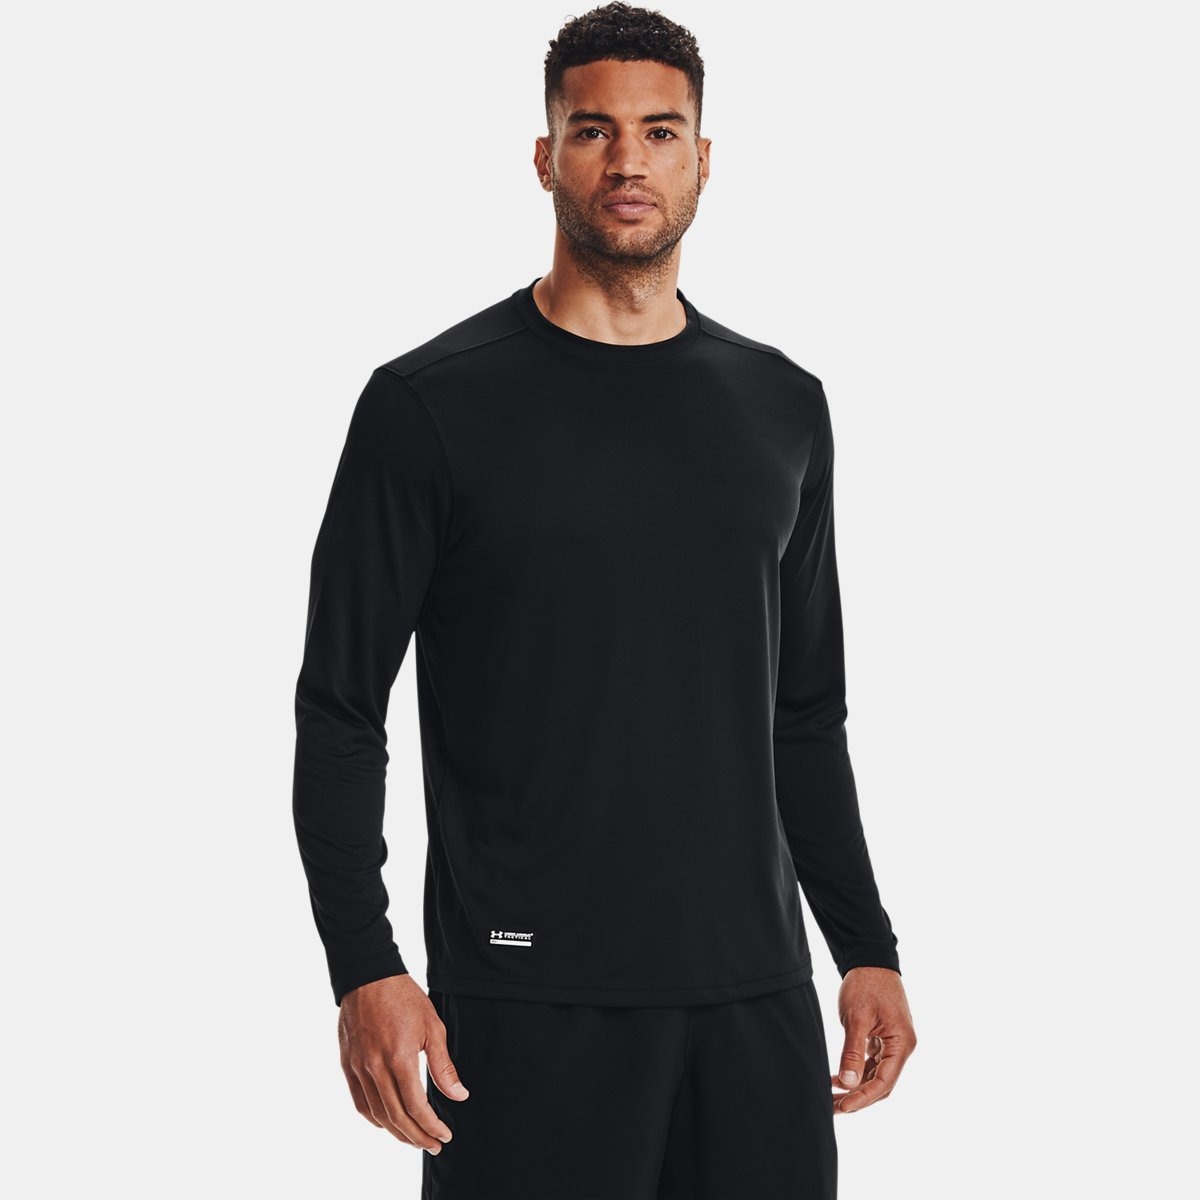 Gent T-Shirt in Black from Under Armour GOOFASH